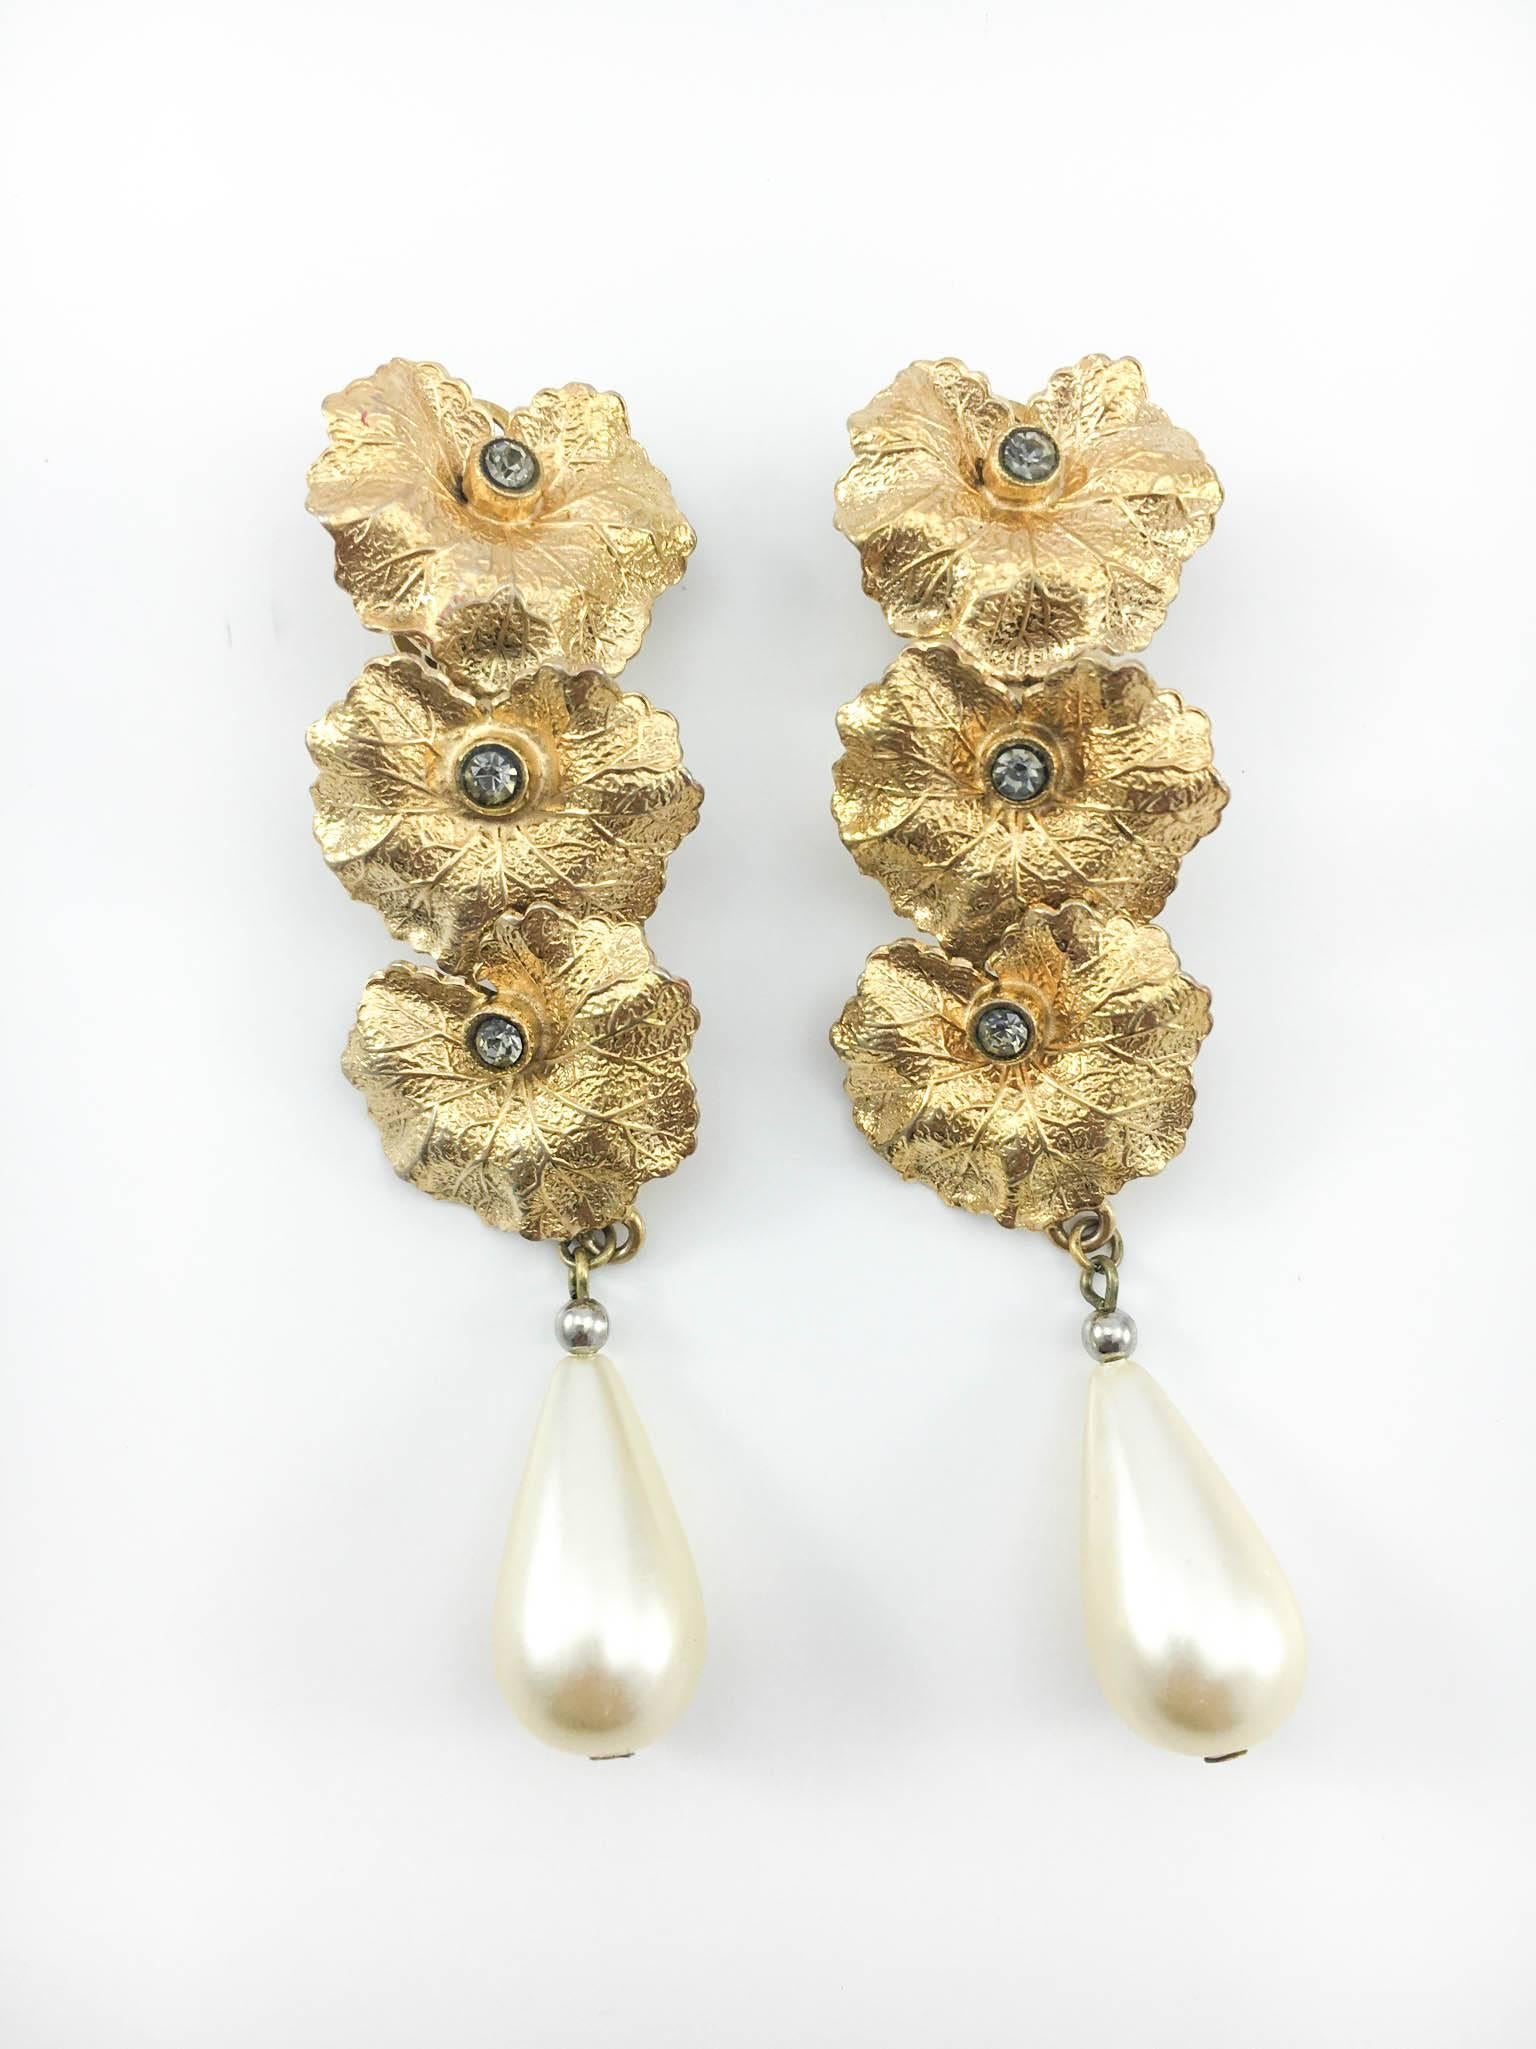 Romantic Henry Perichon Leaves and Pearl Drop Earrings - 1950s